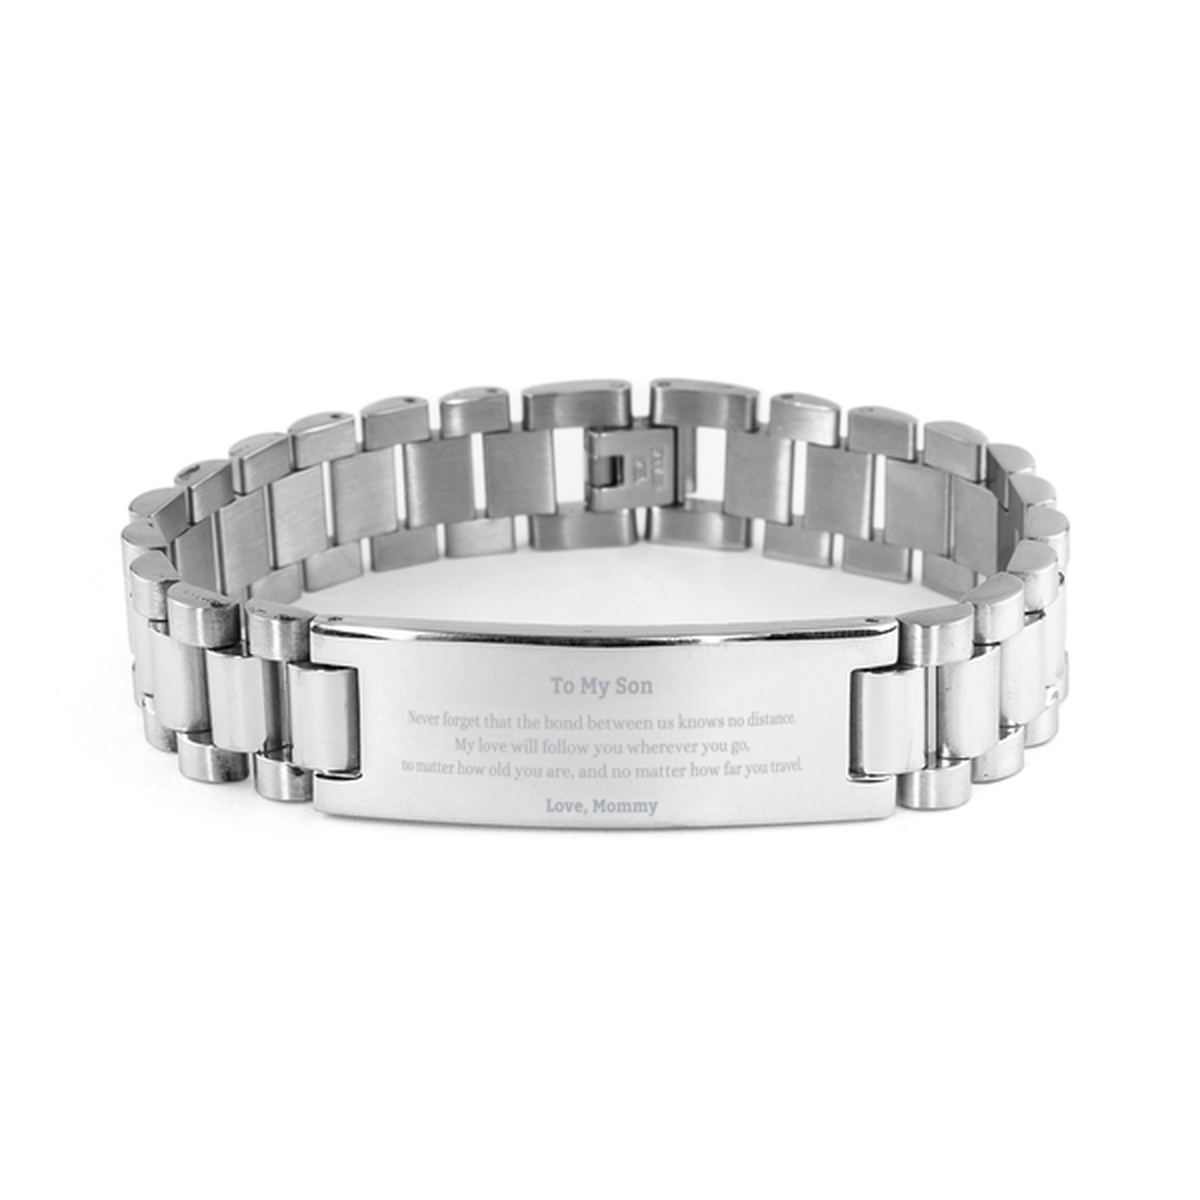 Son Birthday Gifts from Mommy, Adjustable Ladder Stainless Steel Bracelet for Son Christmas Graduation Unique Gifts Son Never forget that the bond between us knows no distance. Love, Mommy